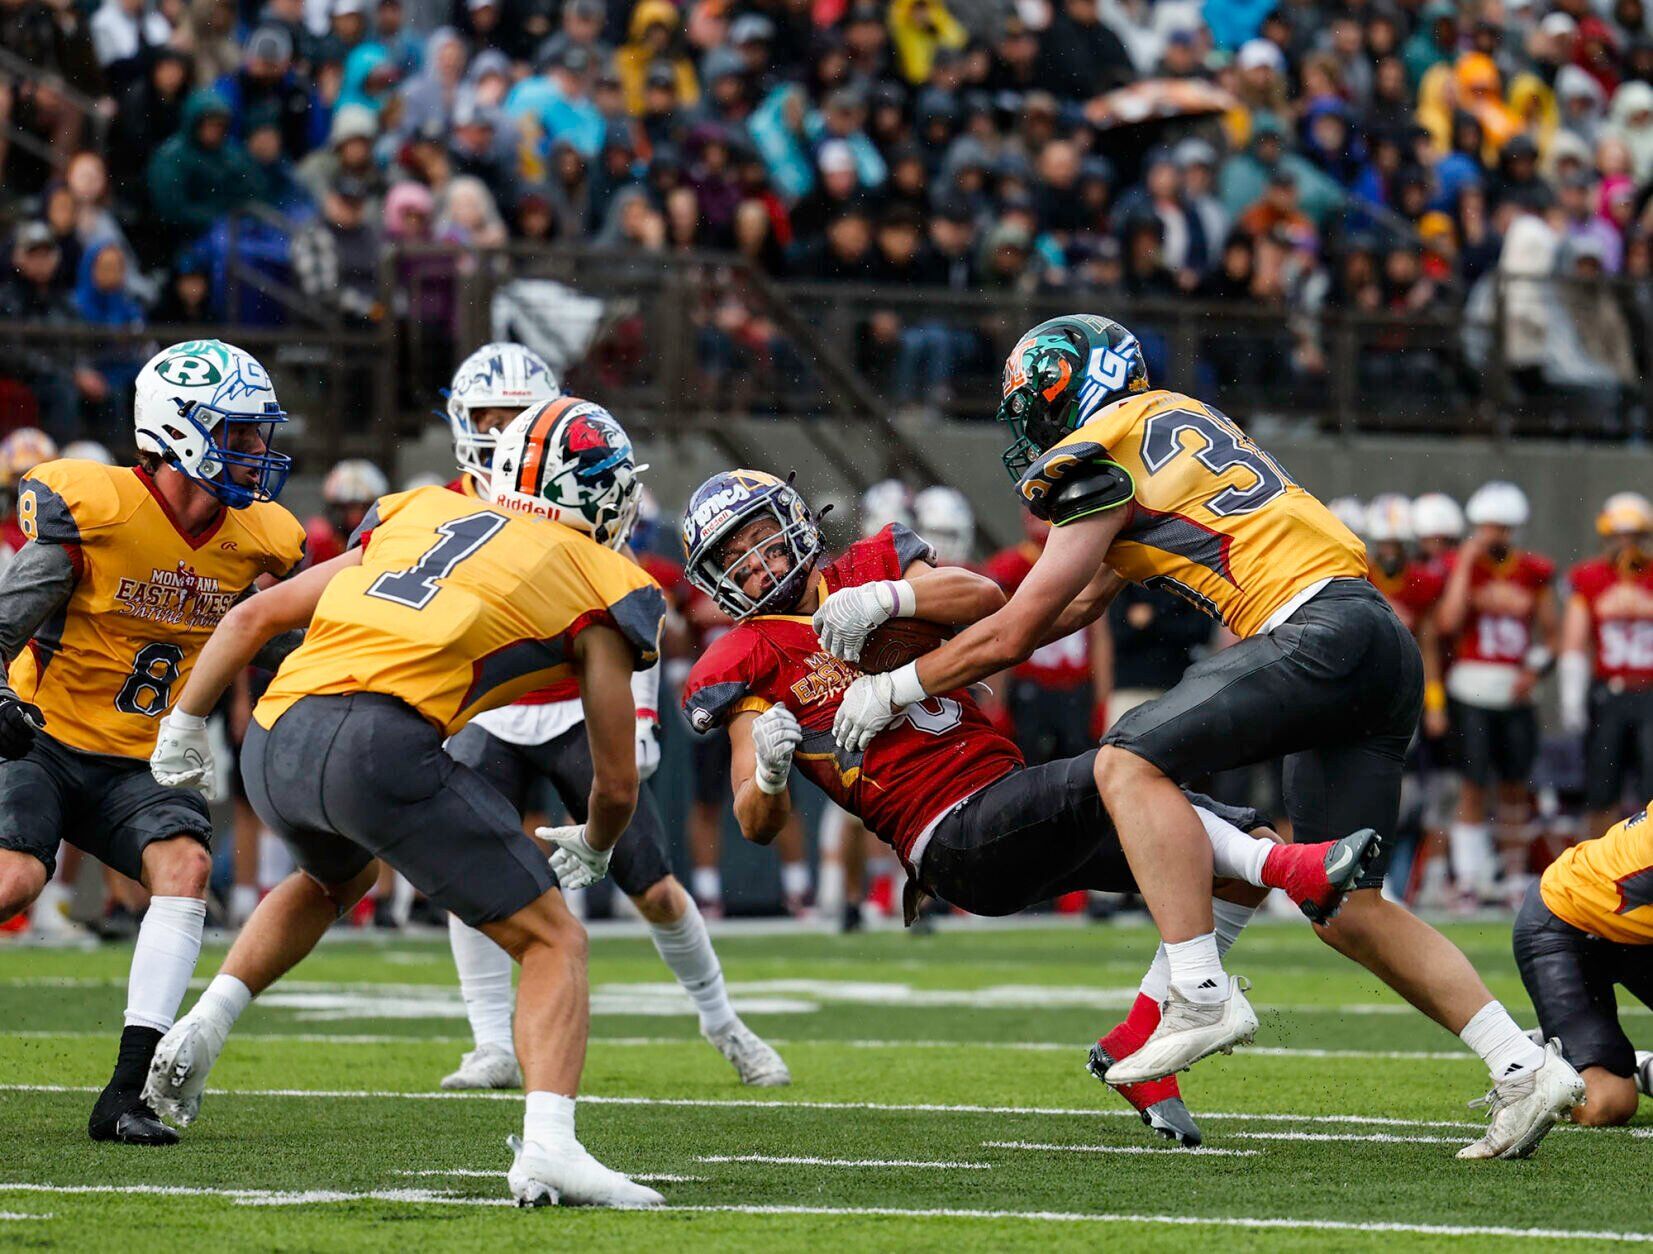 Get ready for an epic showdown: Unveiling of the 77th Montana East-West Shrine Game rosters